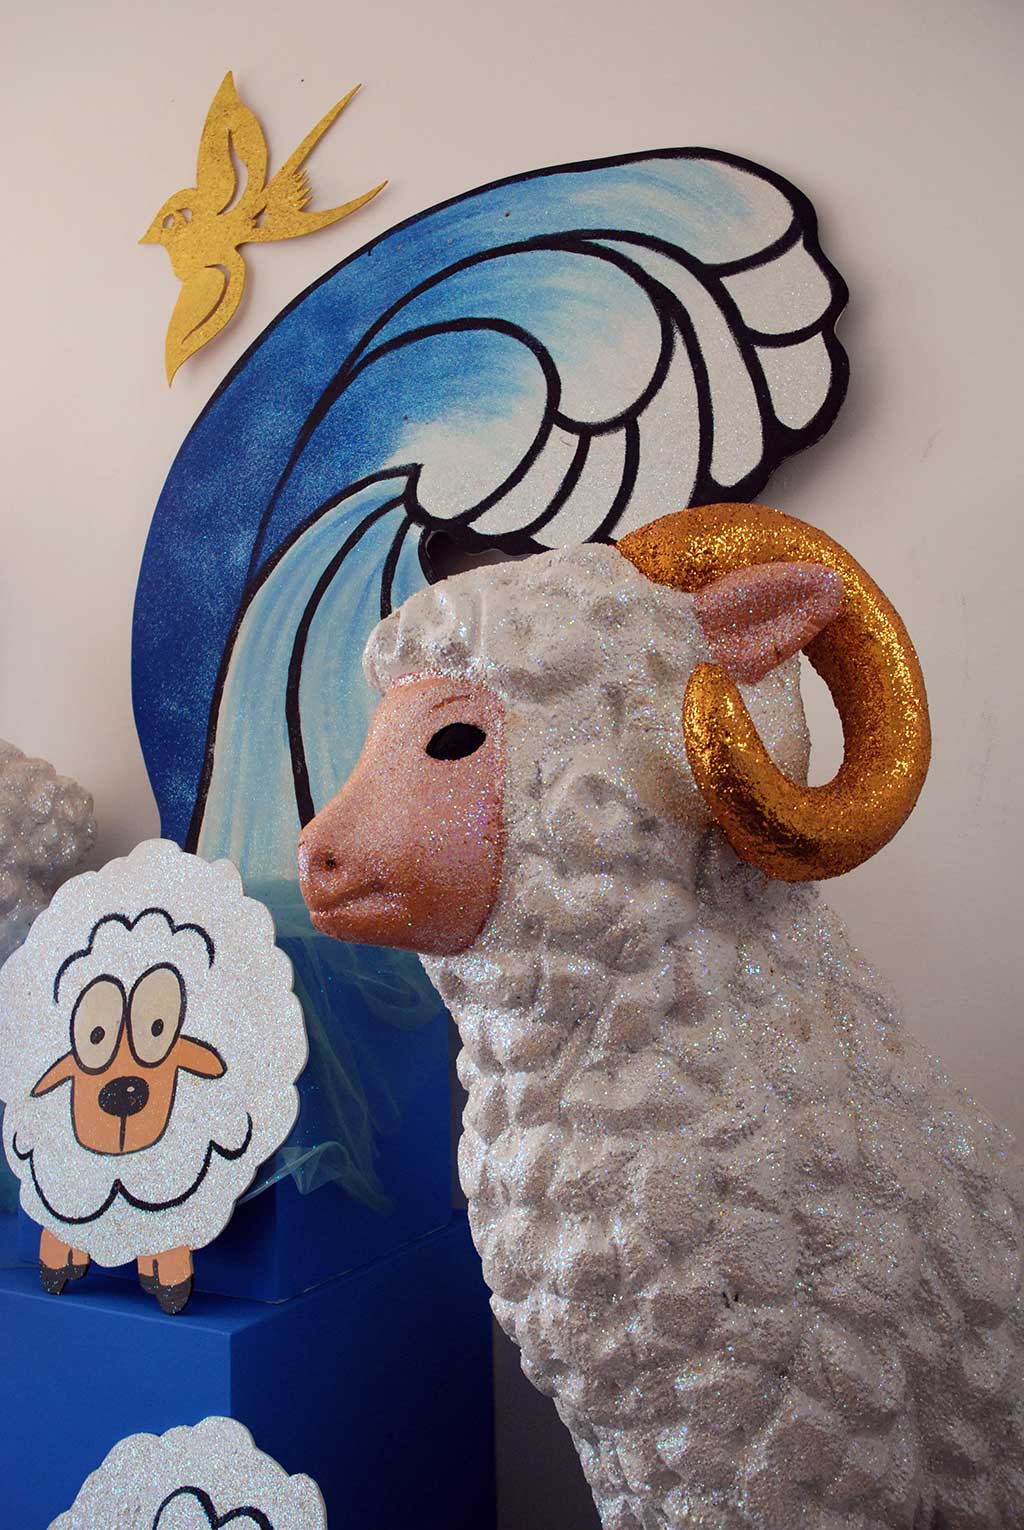 East West Floats, Ram sculpture carved by Yumei Hou